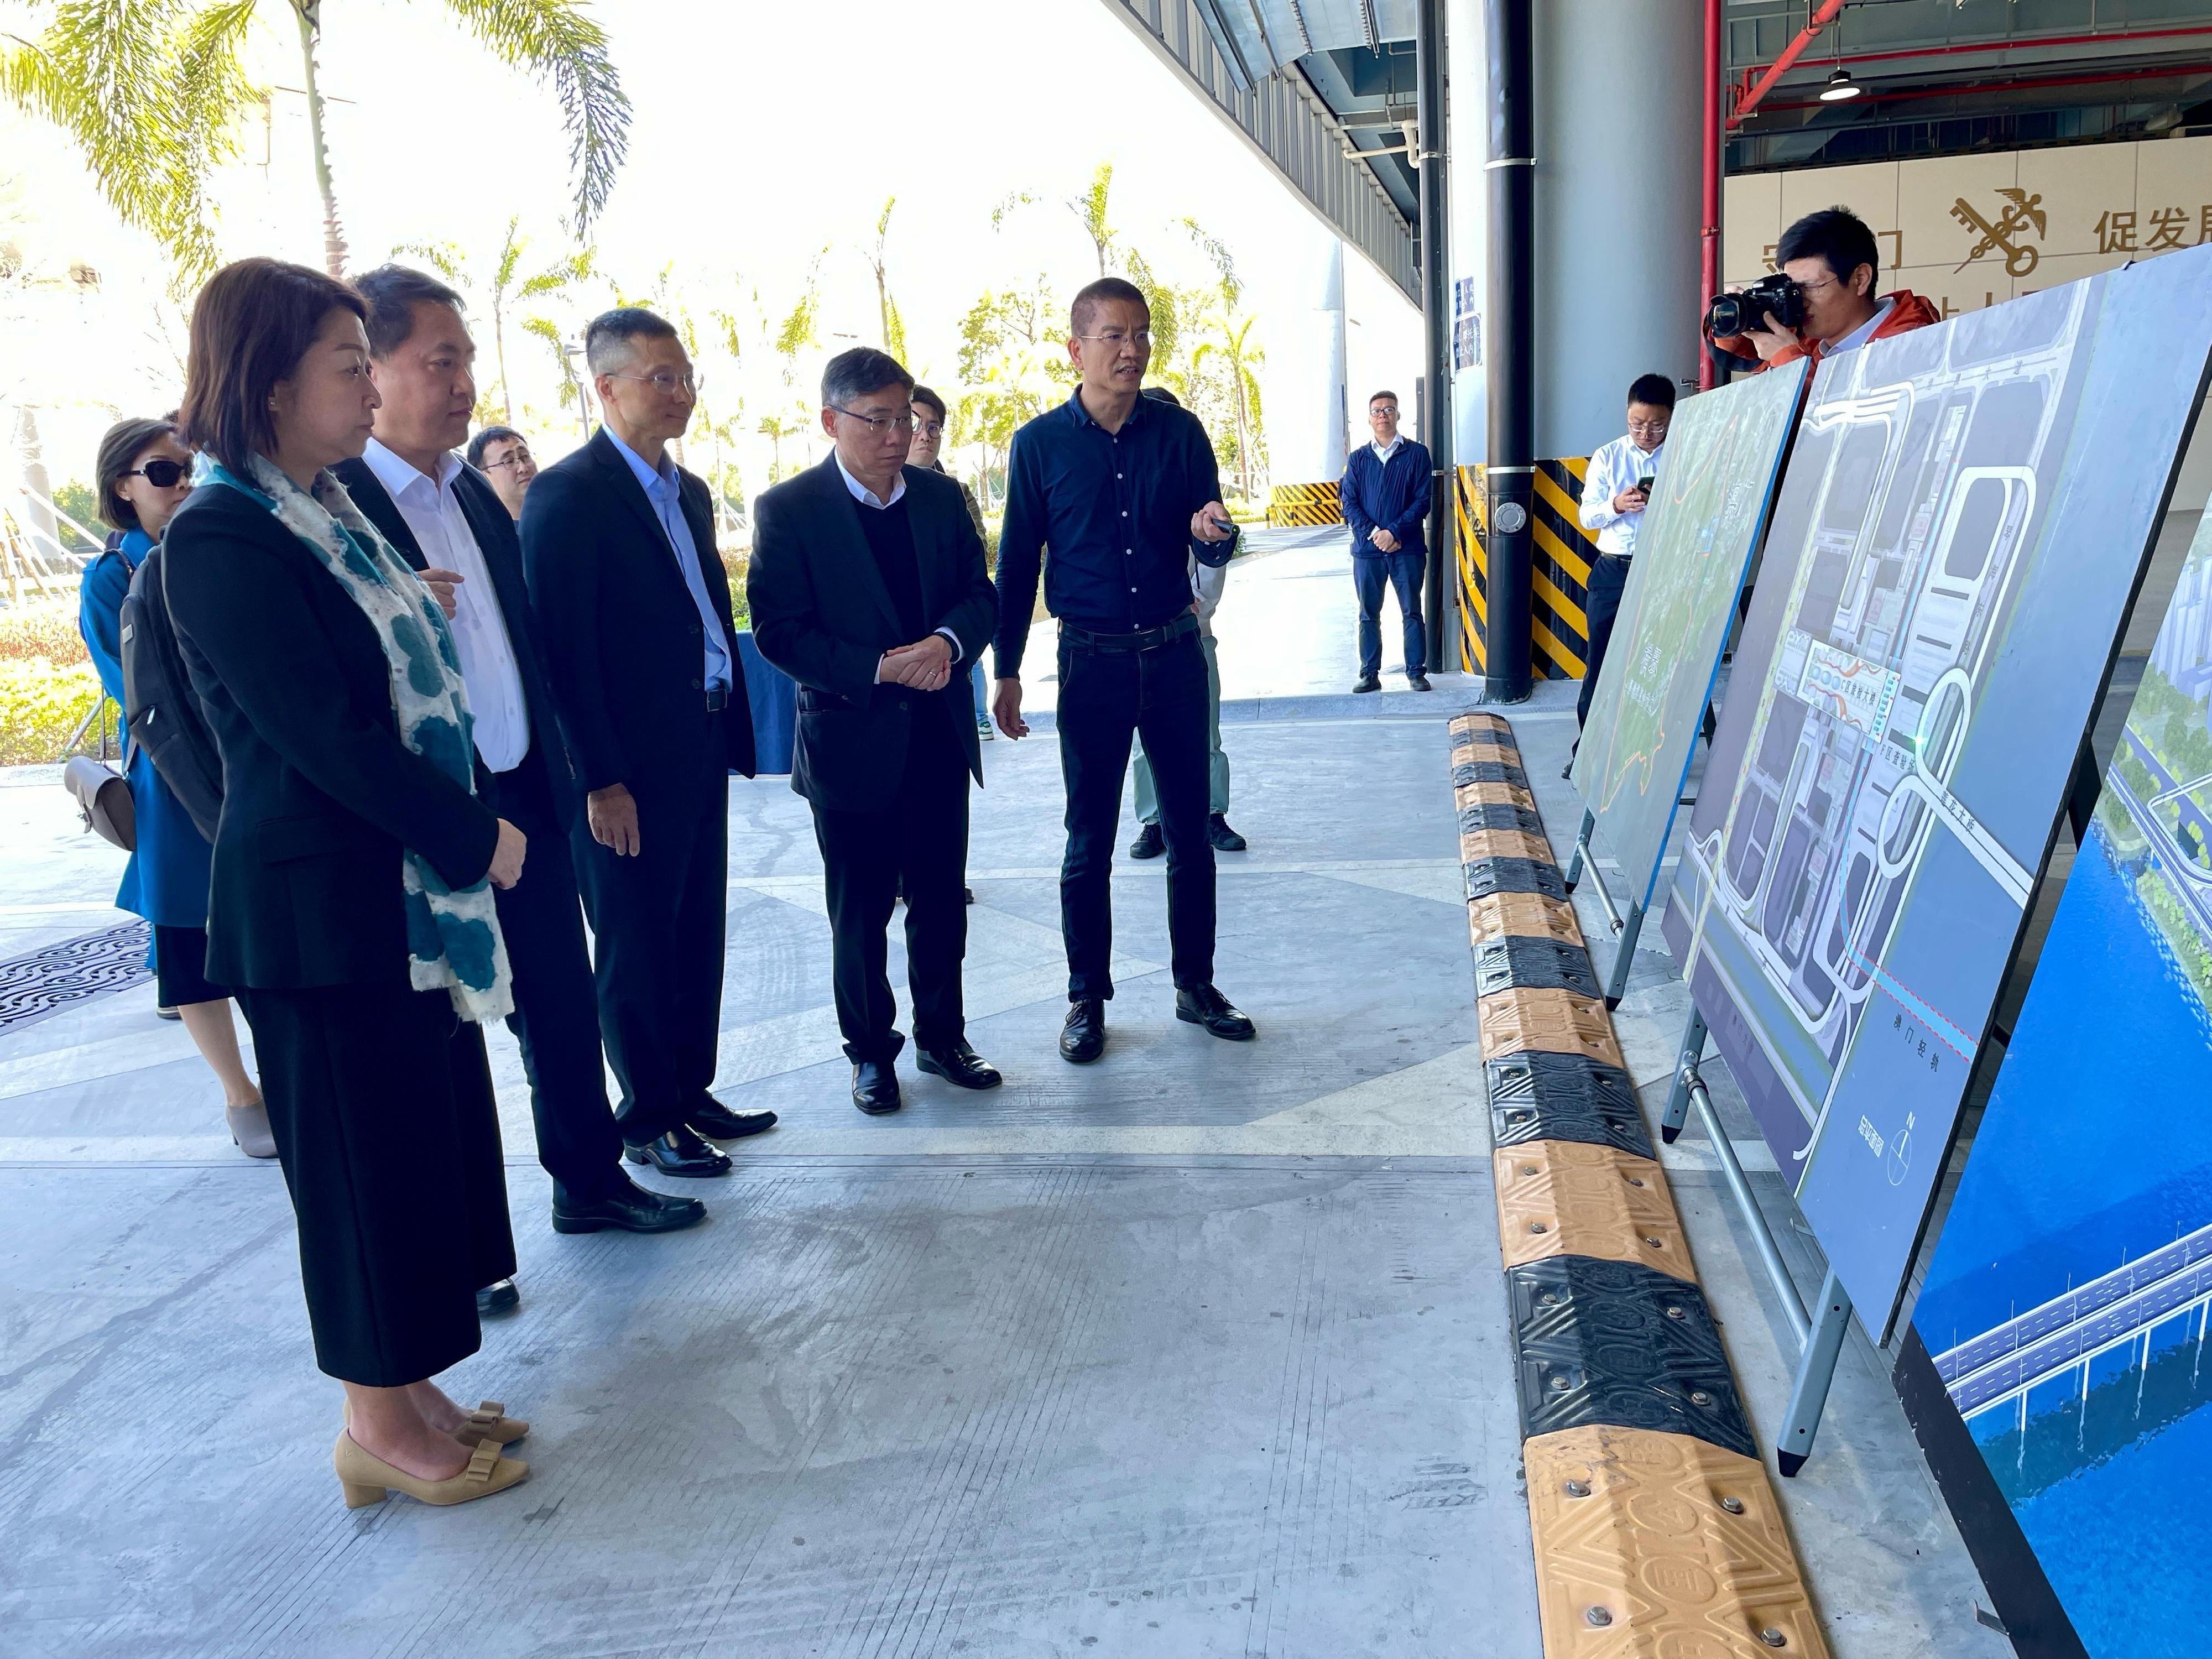 The Secretary for Transport and Logistics, Mr Lam Sai-hung, visited Zhuhai and Macao today (March 12). Photo shows Mr Lam (fourth left) receiving a briefing about the Hengqin Port. Also present is the Commissioner for Transport, Ms Angela Lee (first left).